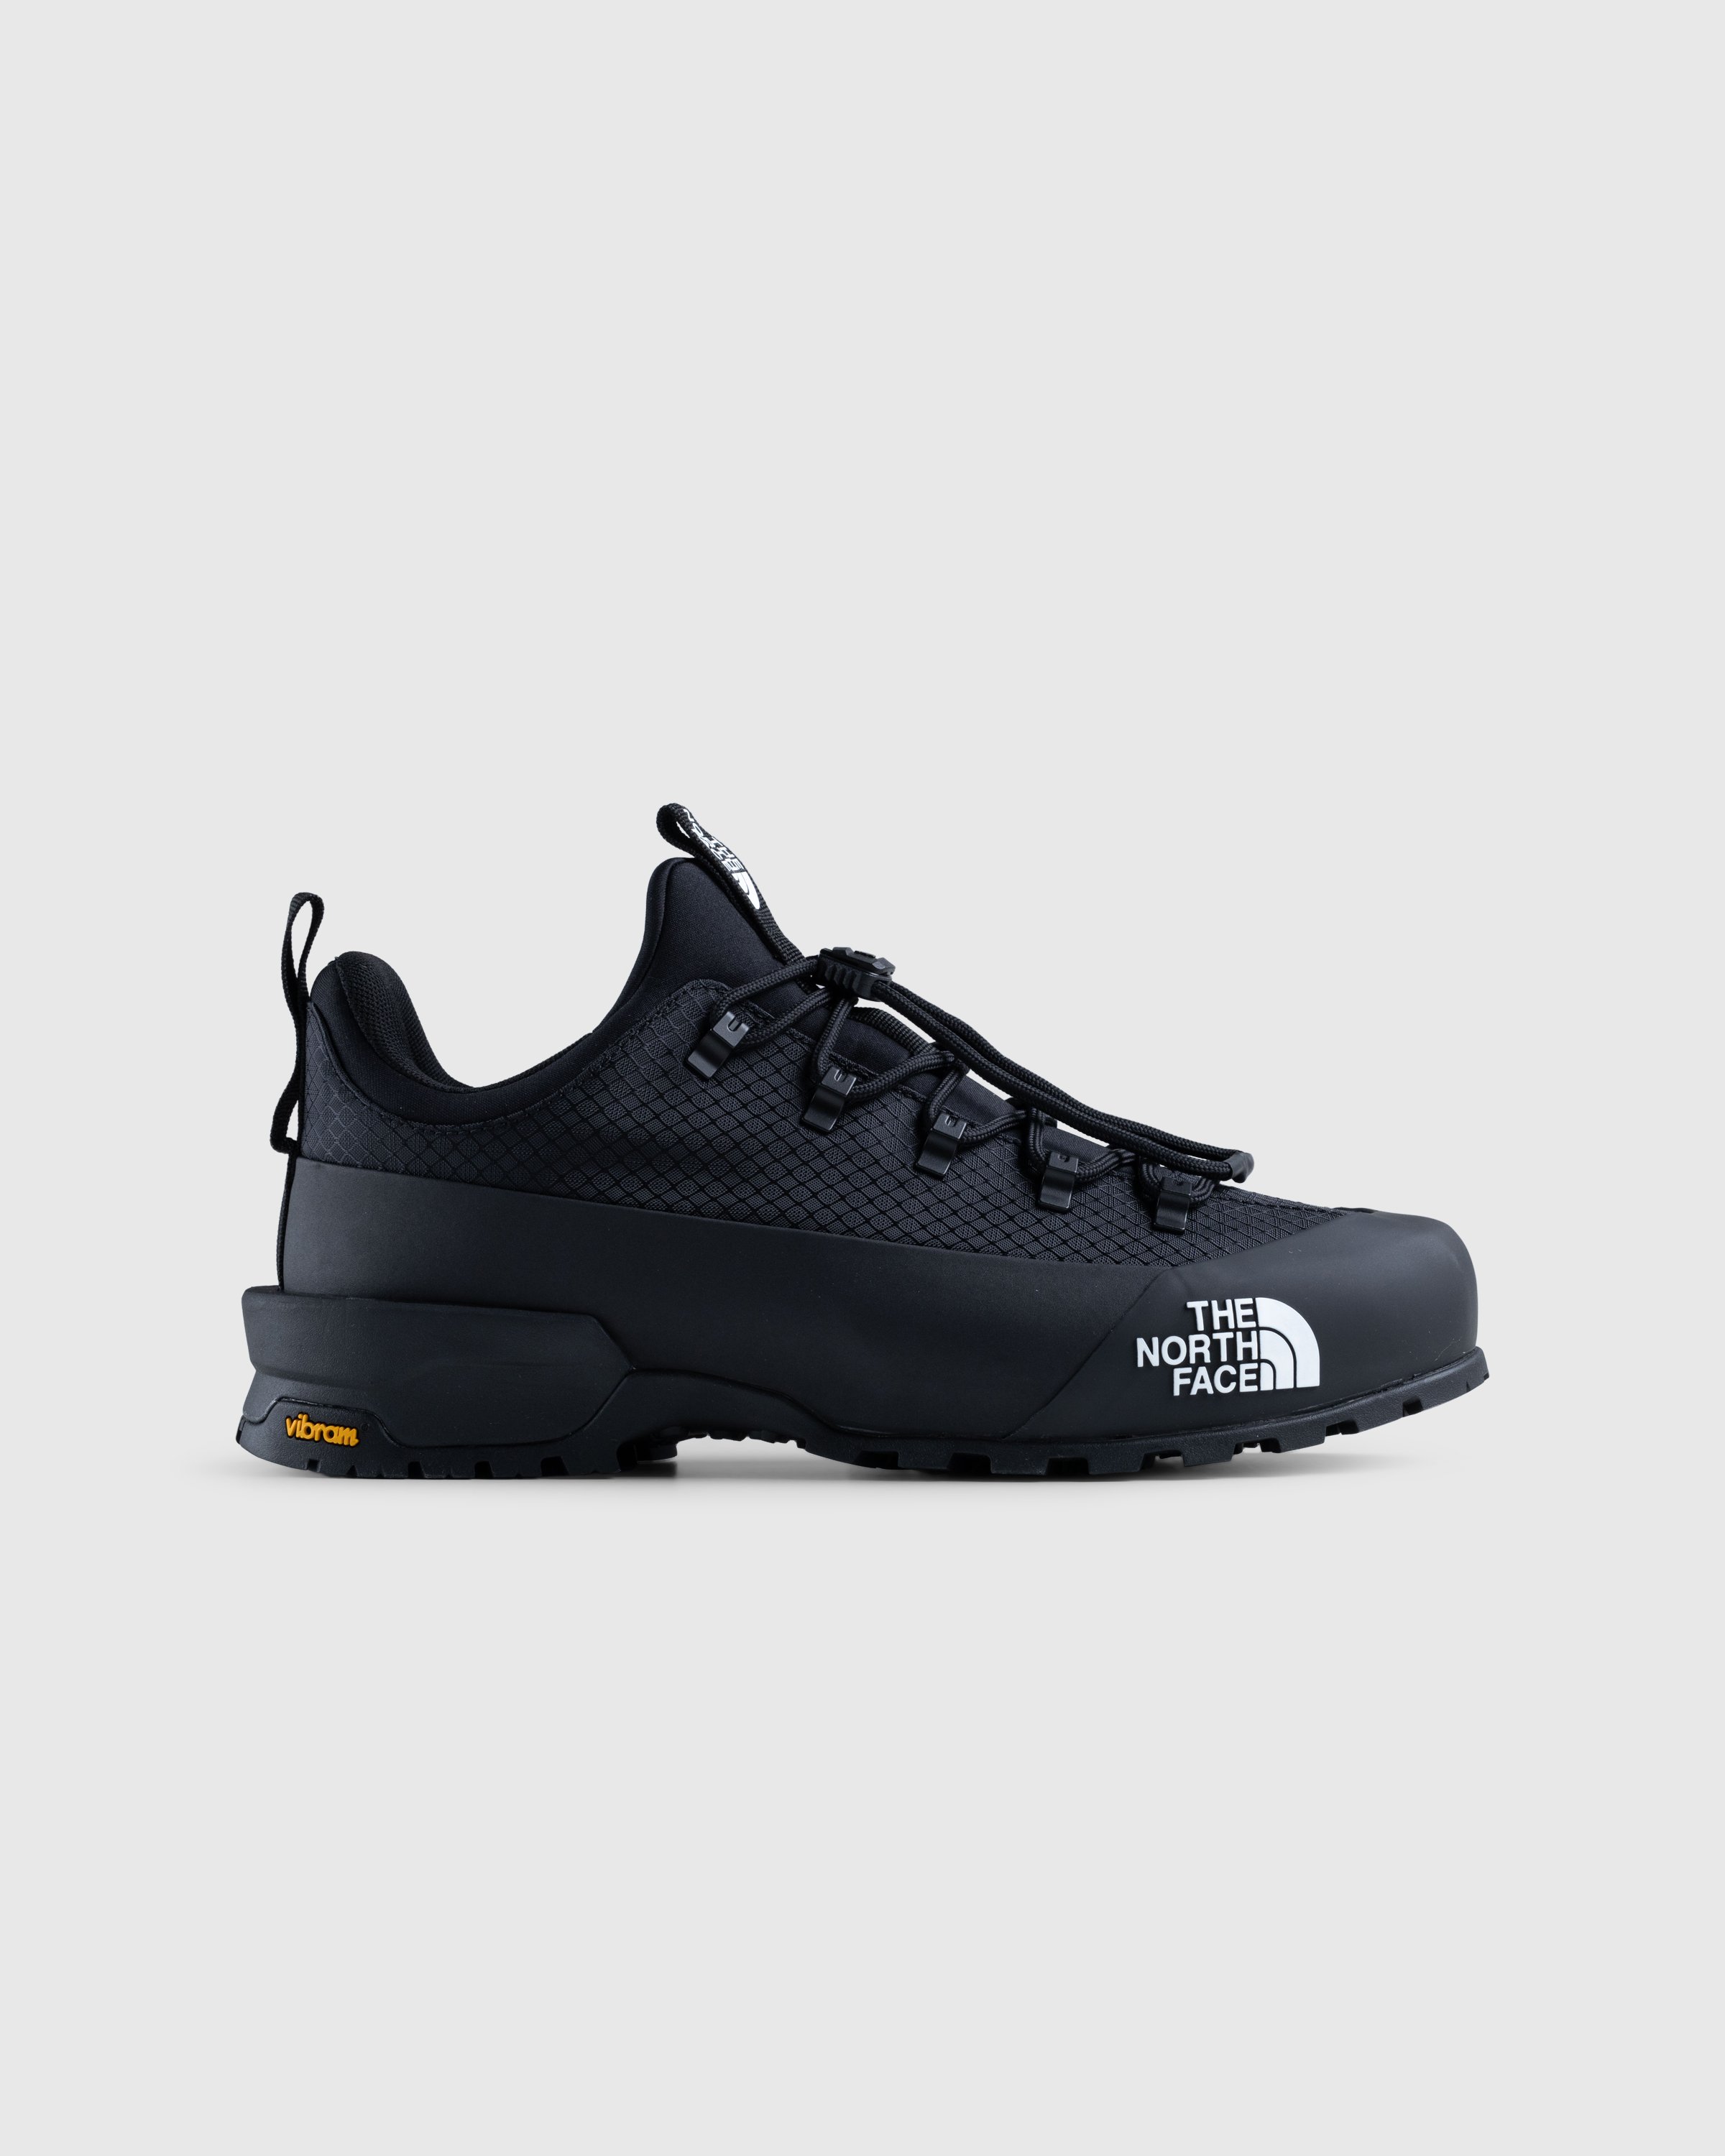 The North Face - Glenclyffe Low Black - Footwear - Black - Image 1